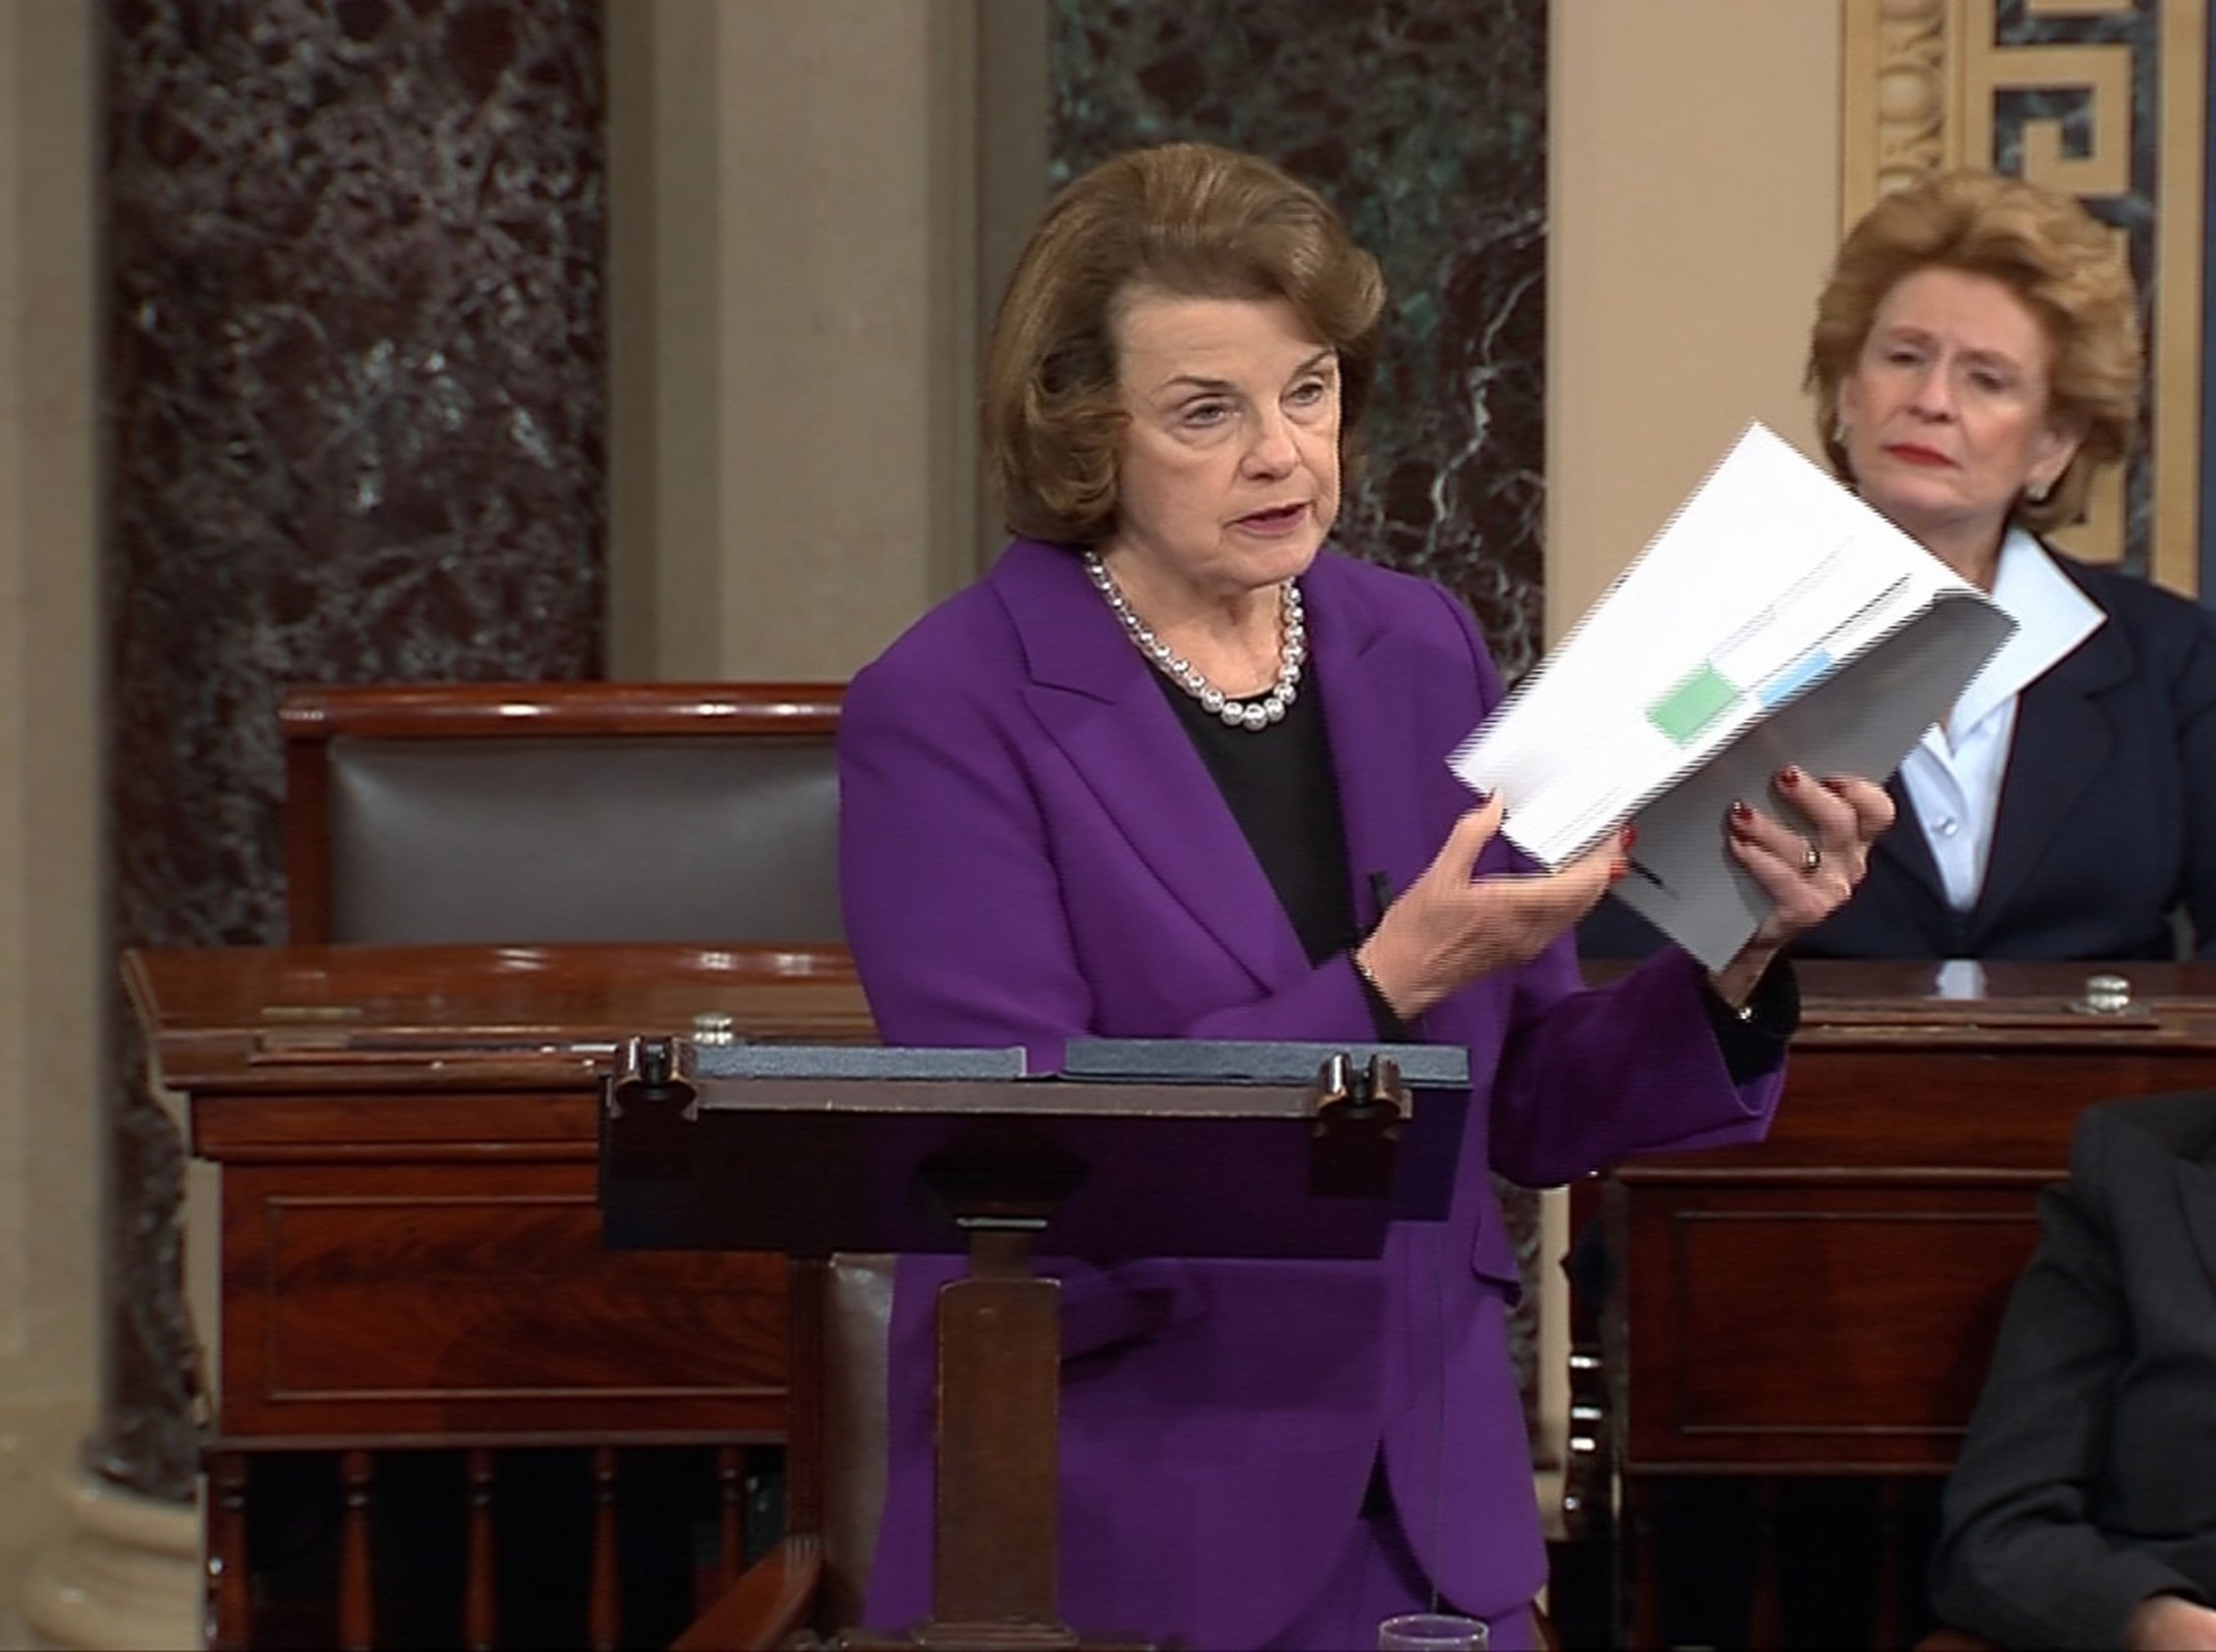 Senate Intelligence Committee Chairwoman Dianne Feinstein discusses a newly released Intelligence Committee report on the CIA's anti-terrorism tactics, in a speech on the floor of the U.S. Senate on Capitol Hill in Washington on Dec. 9, 2014.